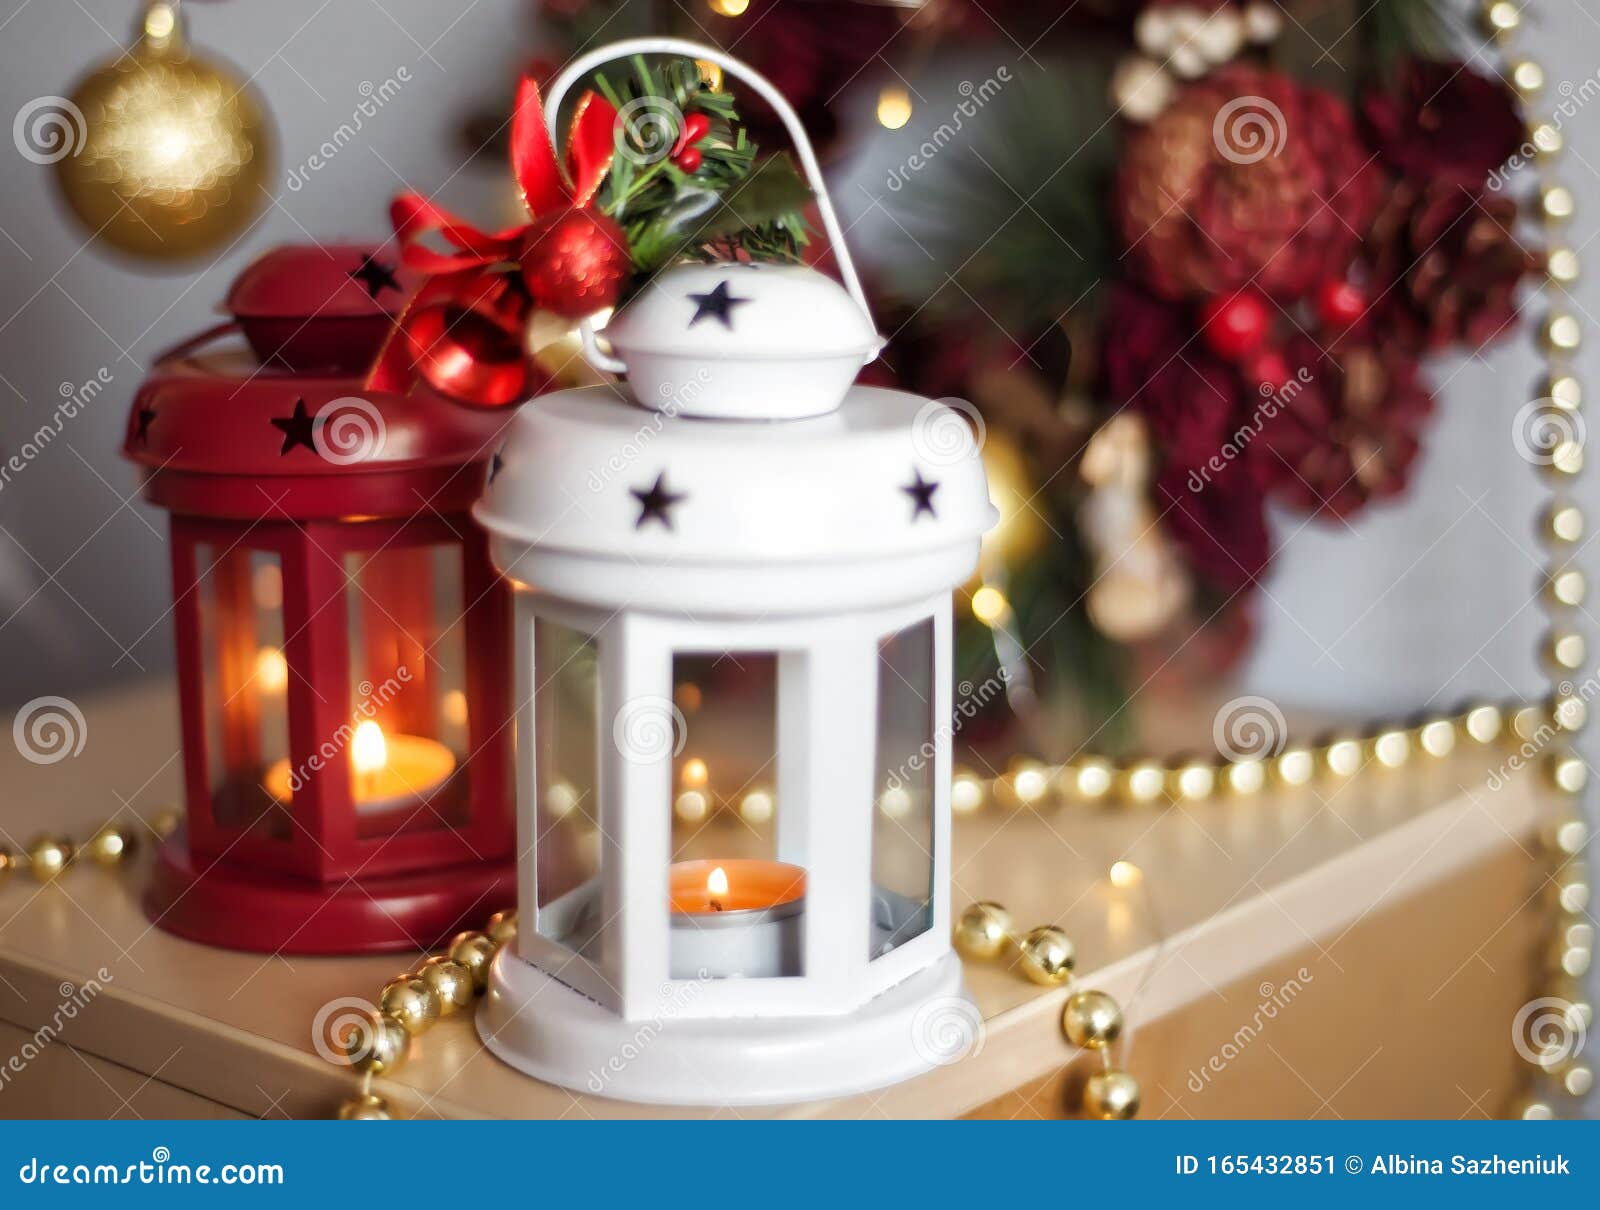 Vintage Christmas Lanterns Red and White with Burning Candles. Cozy ...